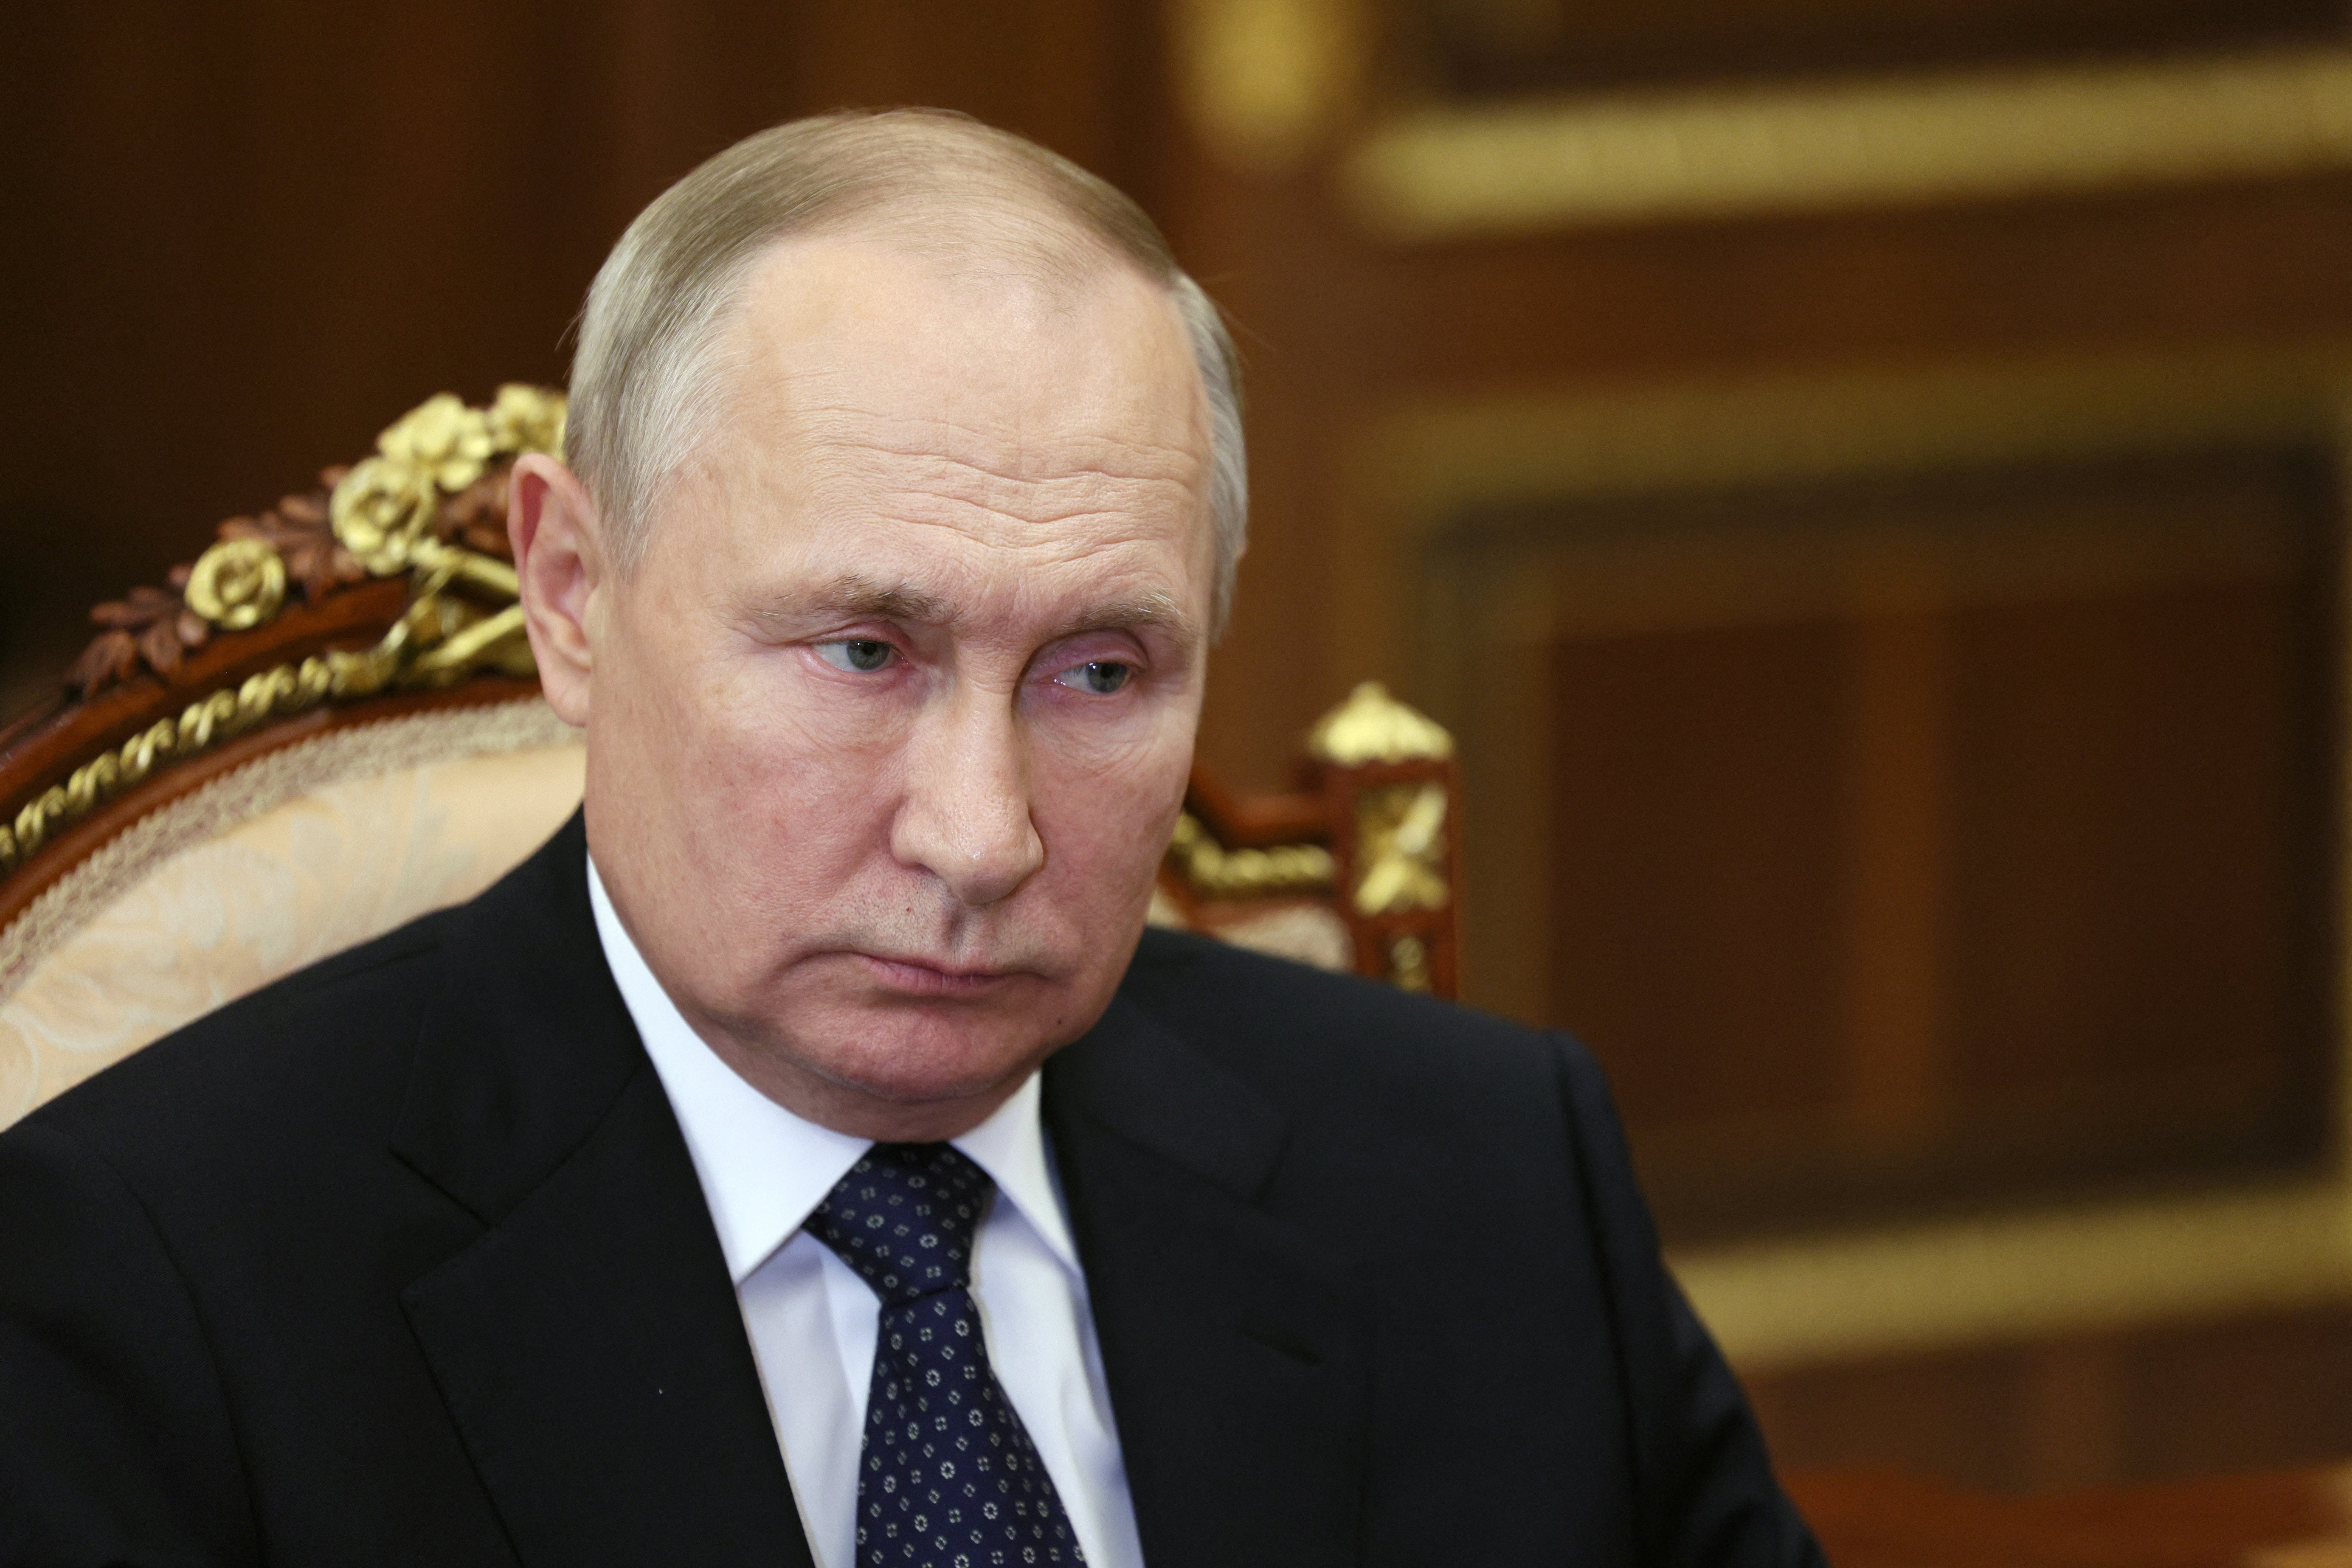 A close-up photo of Russian president Vladimir Putin, looking to the side.